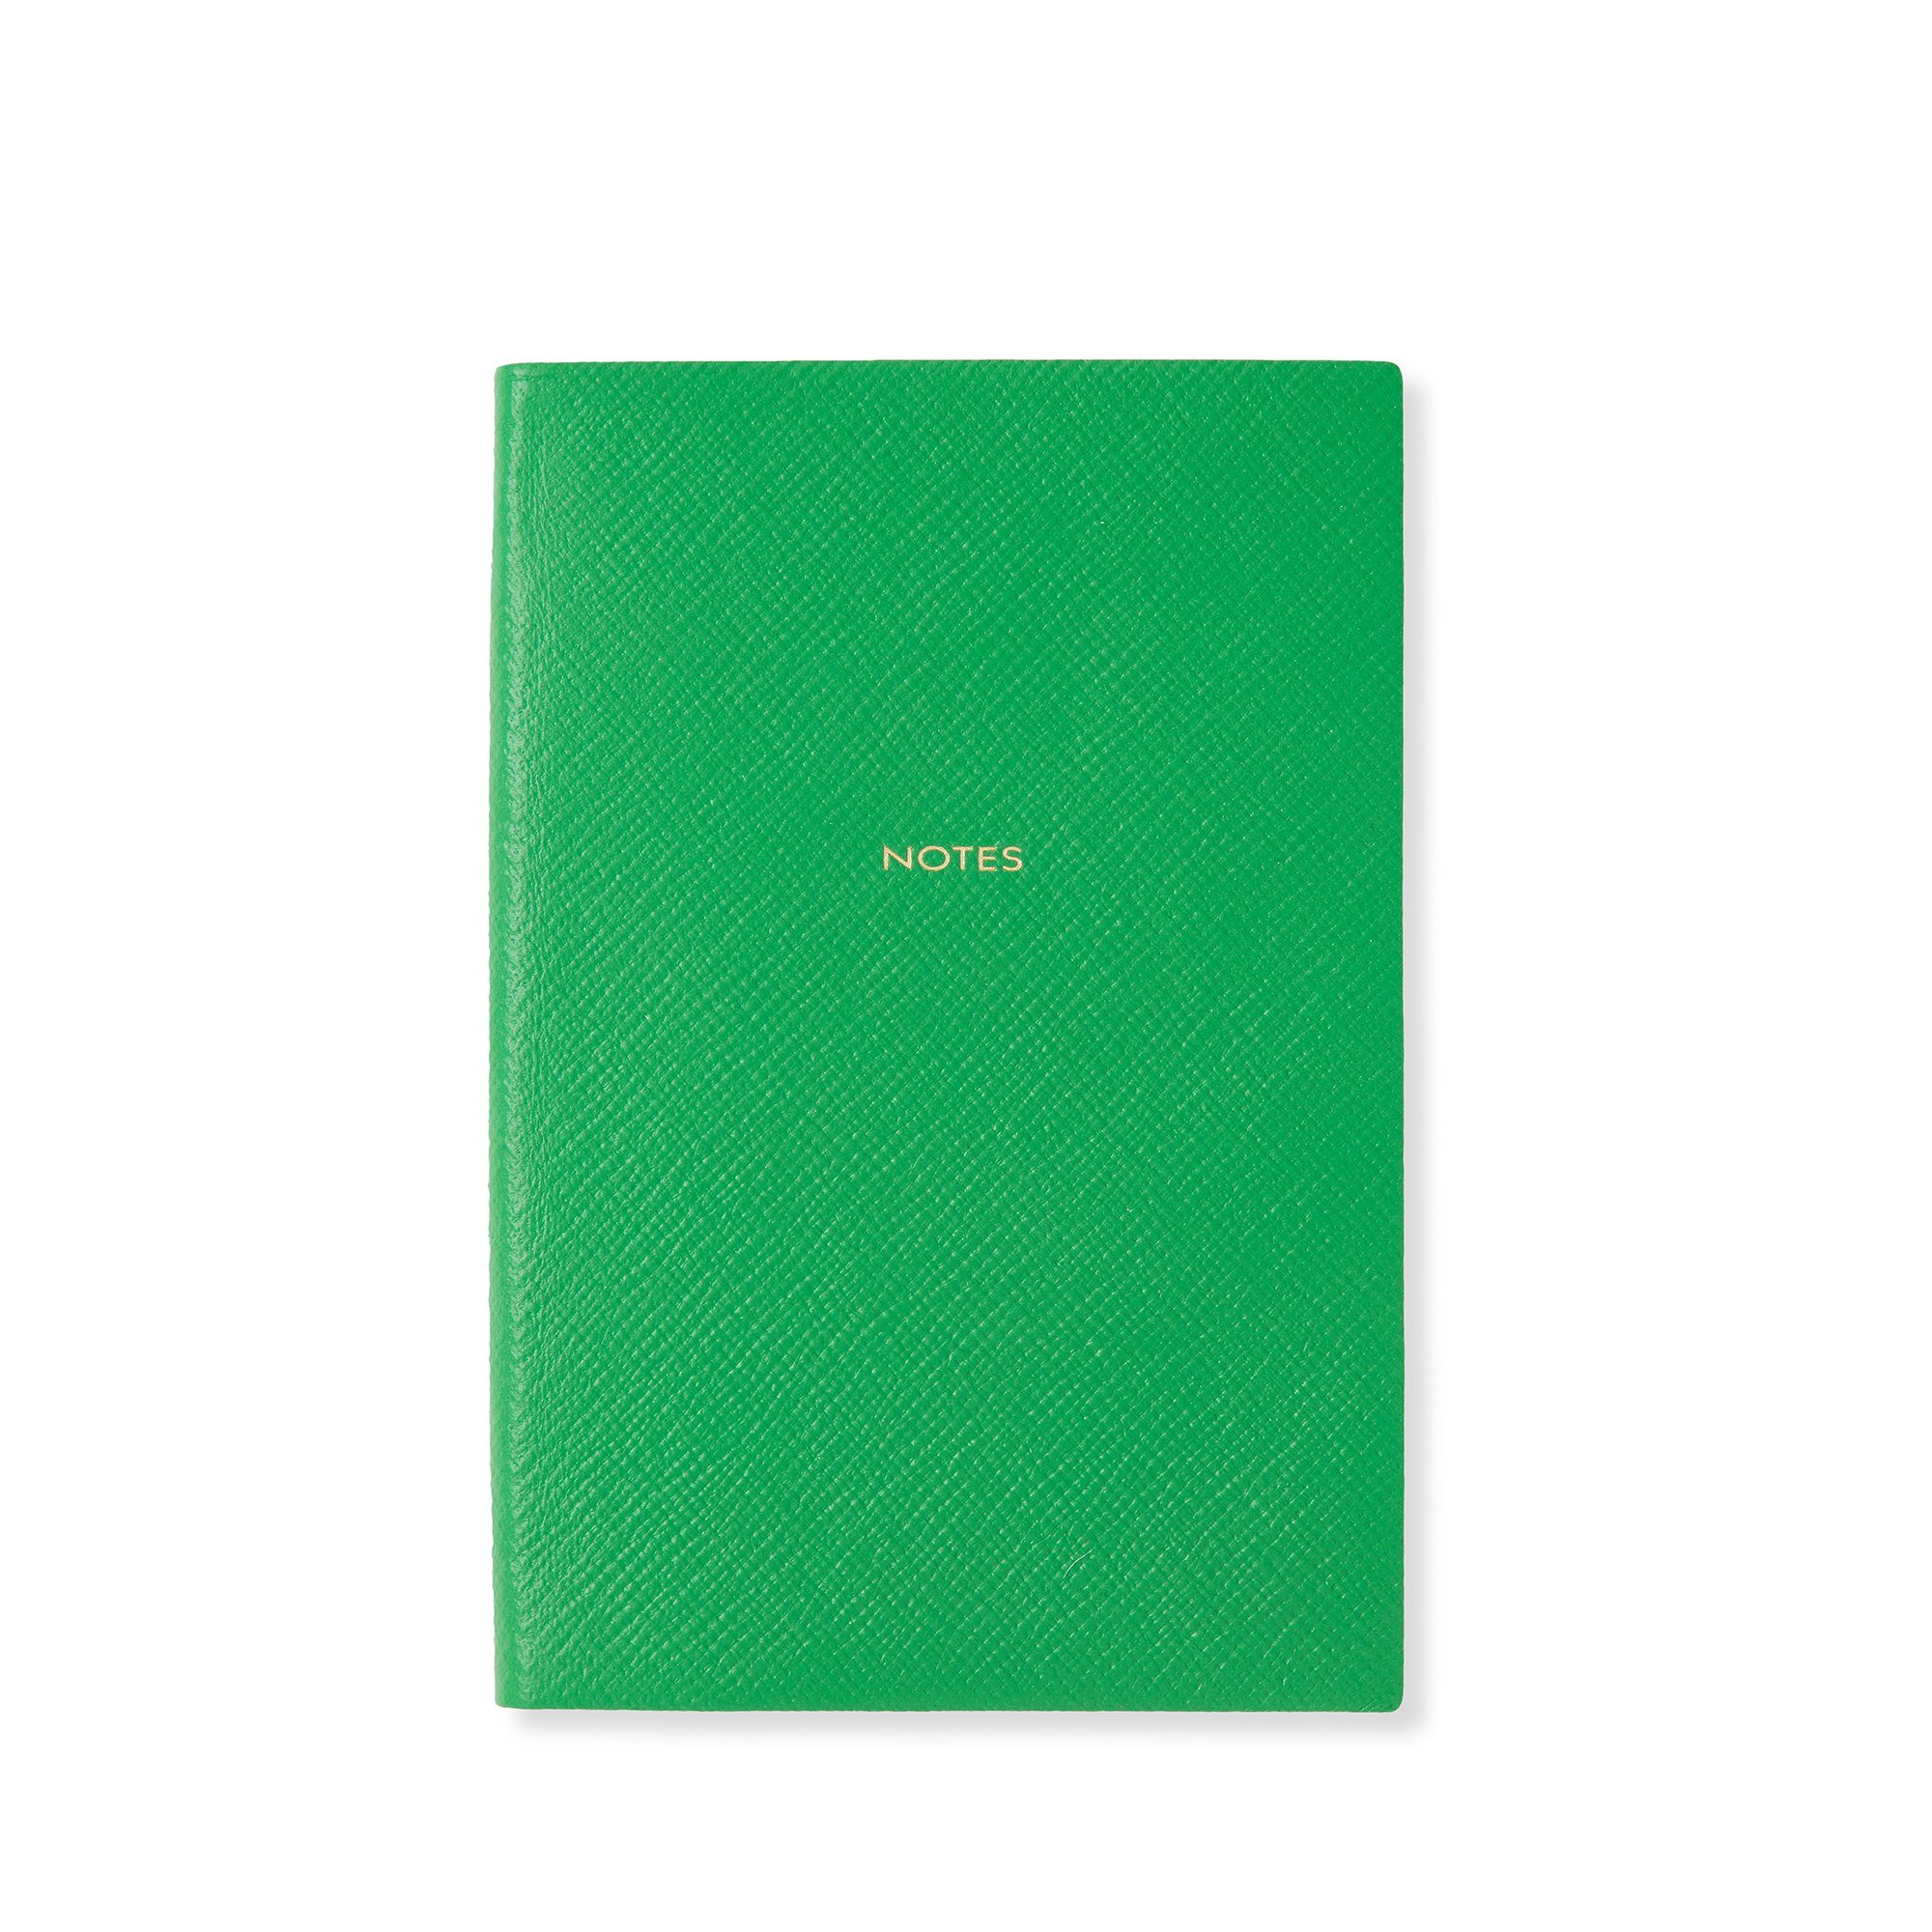 Smythson Notes Chelsea Notebook In Panama In Bright Emerald